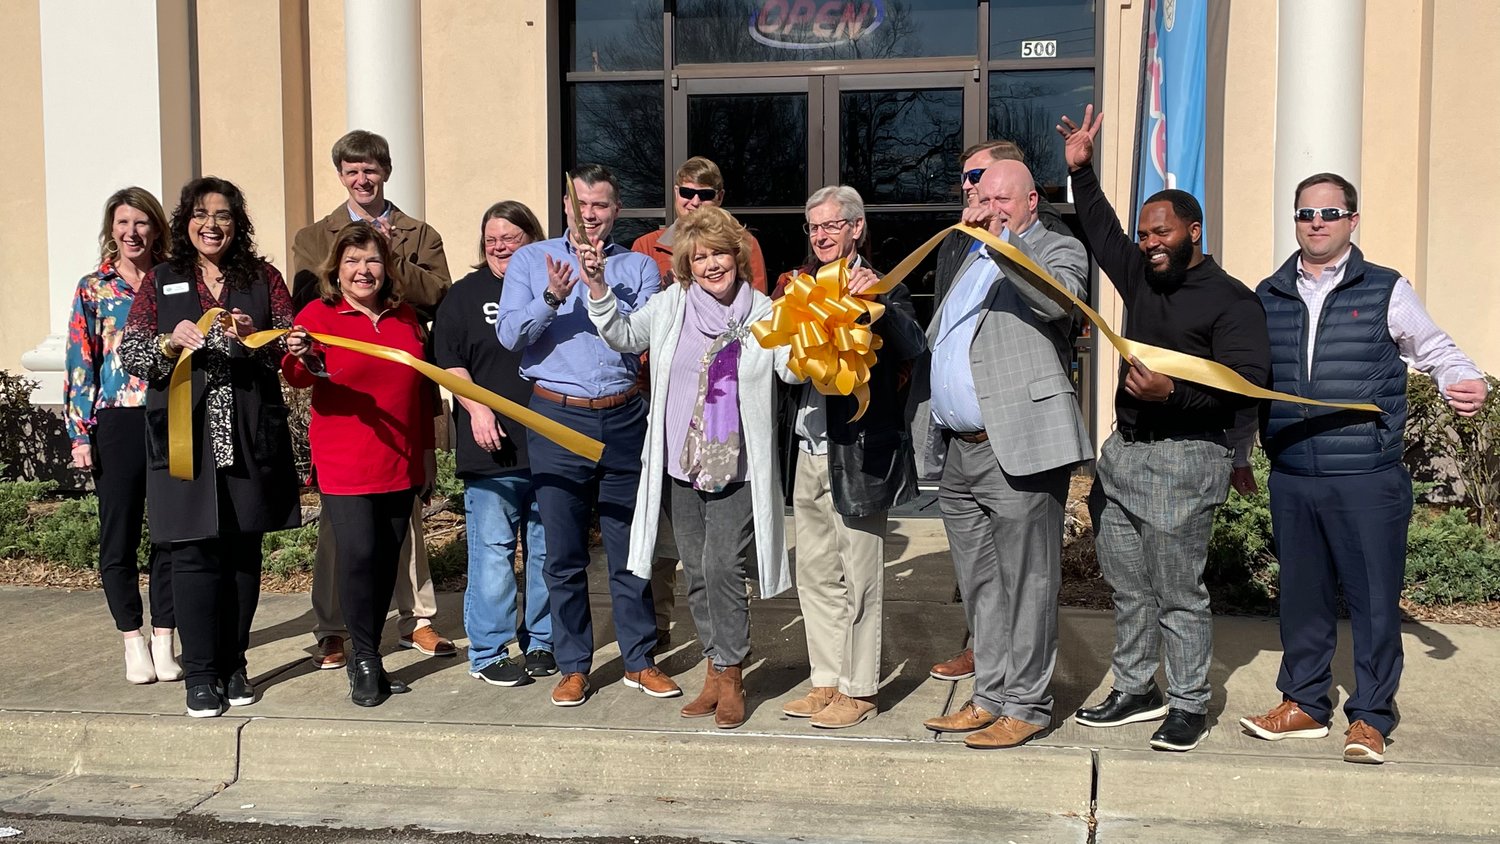 Madison city officials, local business representatives, and members of the Madison Police Department came out in support of Ice and Vice frozen yogurt shop’s official ribbon cutting on Monday afternoon. The shop opened in March 2020, but had a delayed ribbon cutting due to the pandemic.